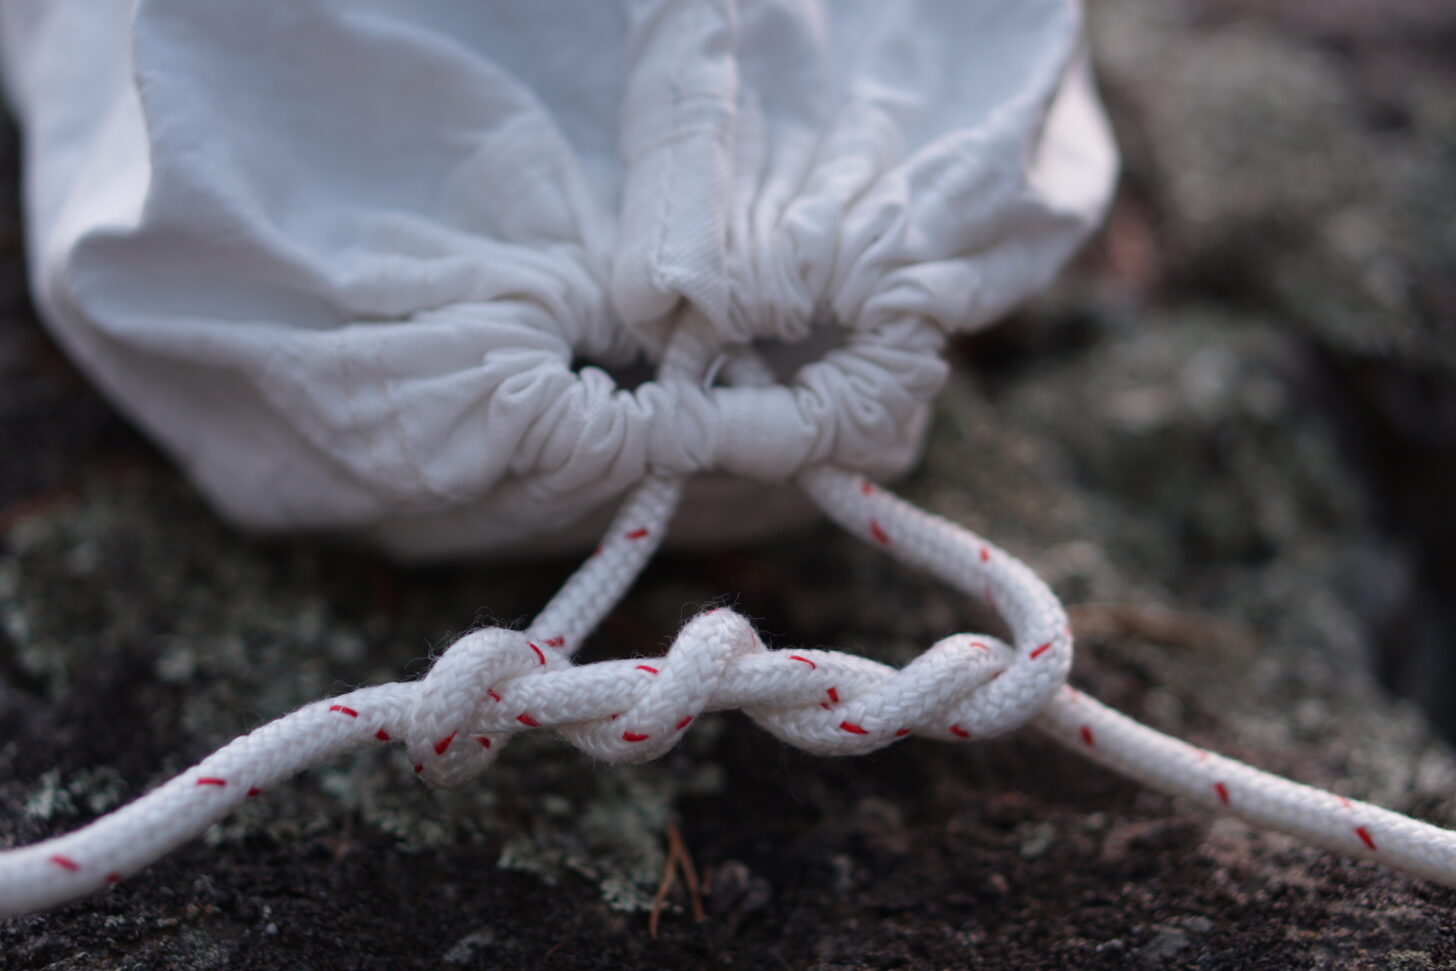 The double (or triple) overhand knot is recommended to secure the cinched opening of the Ursack. Photo: Ryan Jordan.